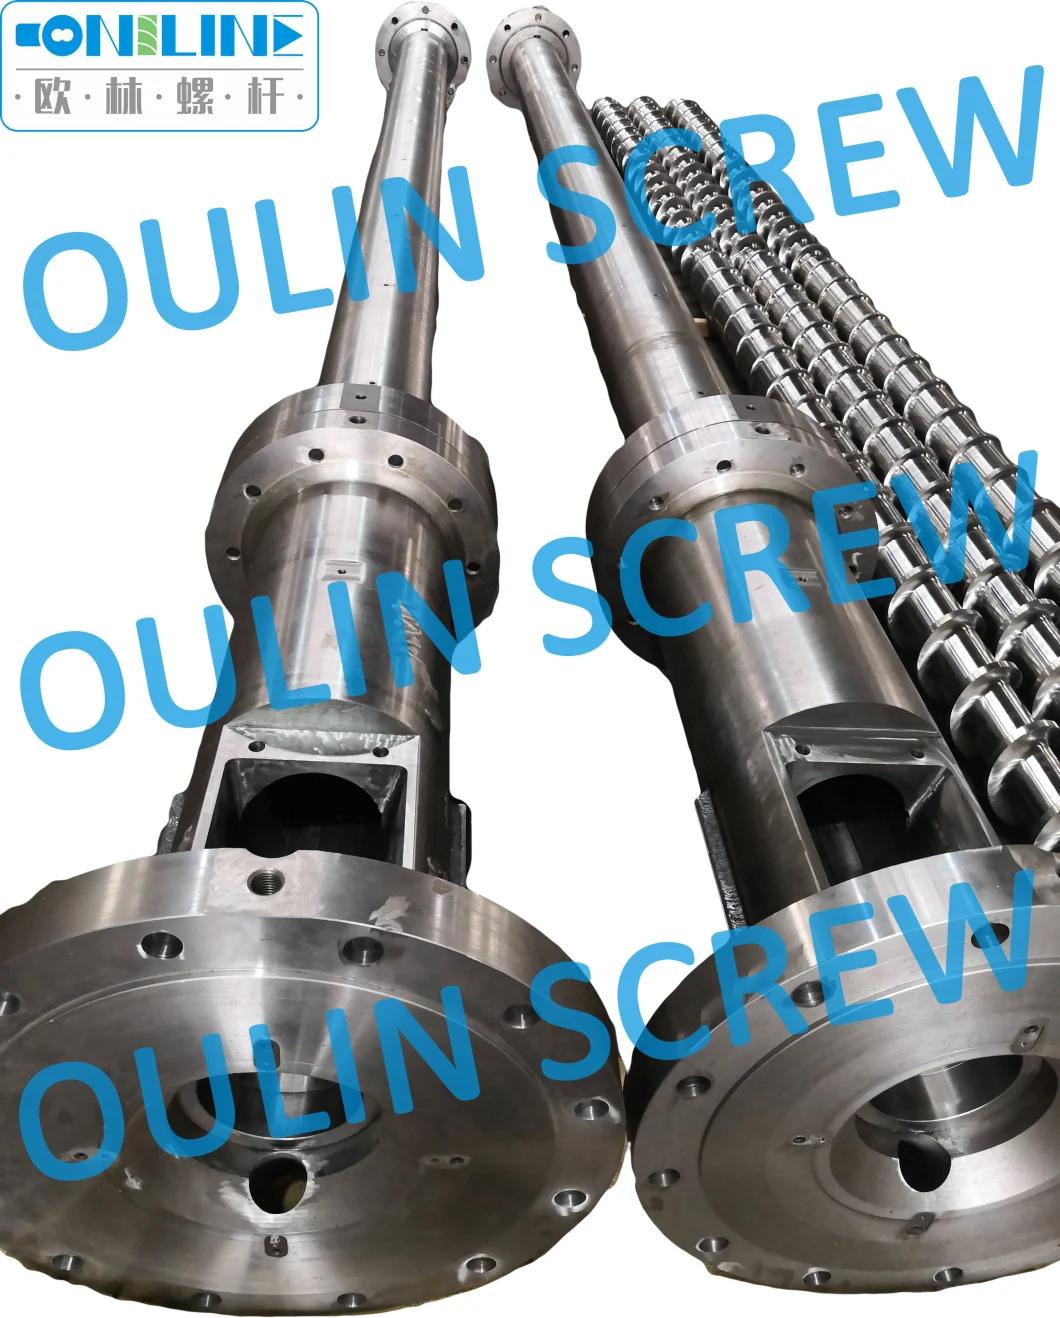 180mm Bimetallic Screw and Barrel for Agricultural Film Recycling Extrusion